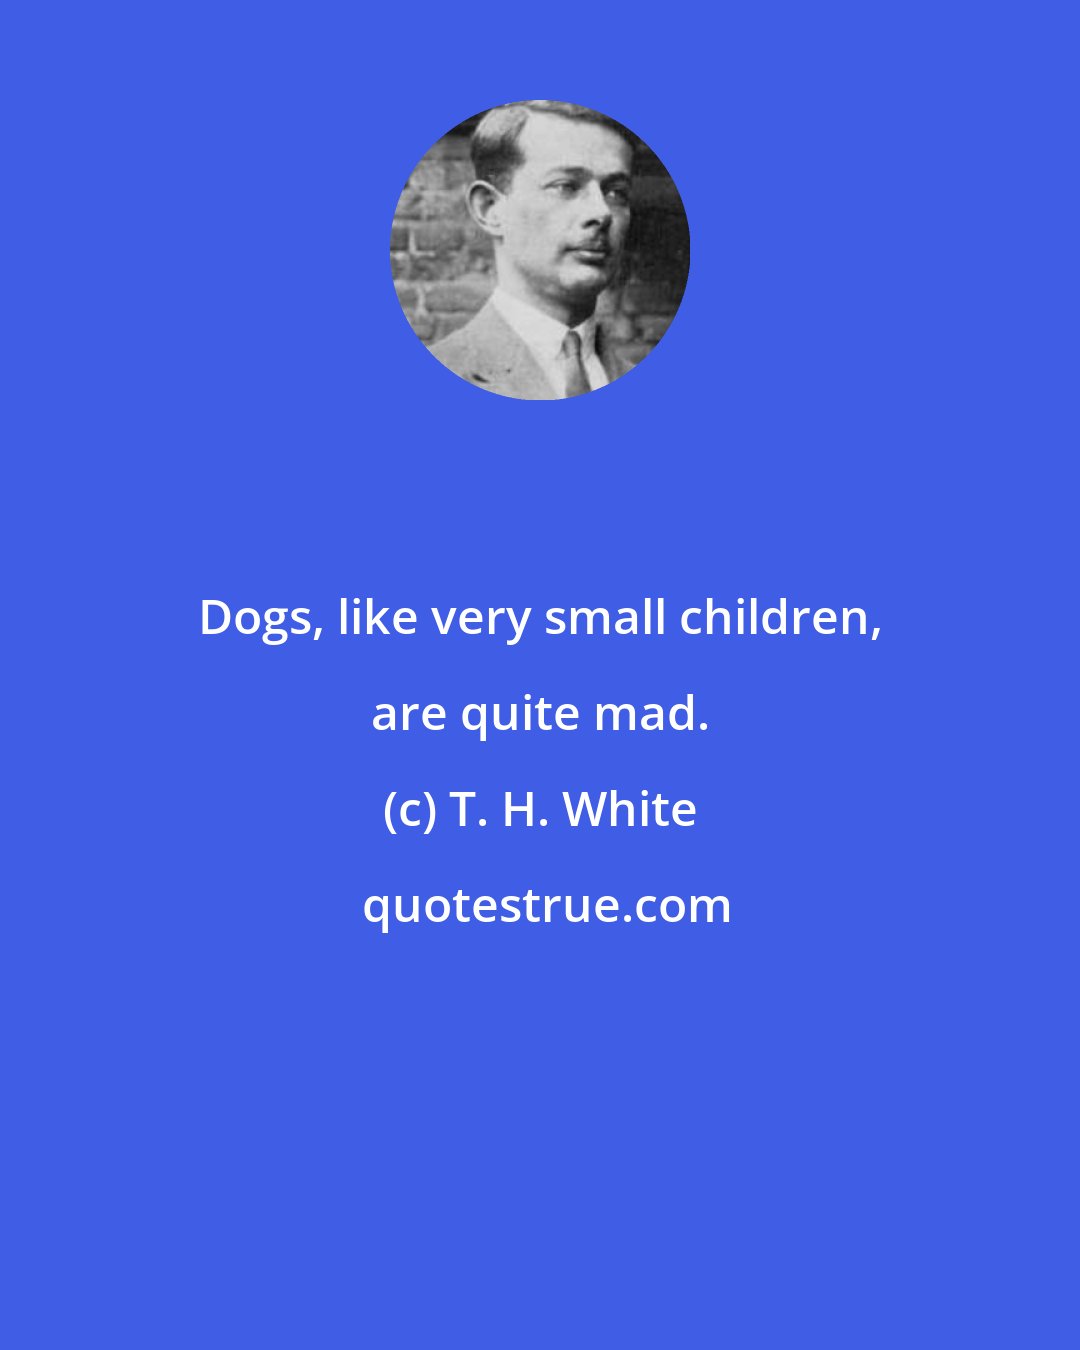 T. H. White: Dogs, like very small children, are quite mad.